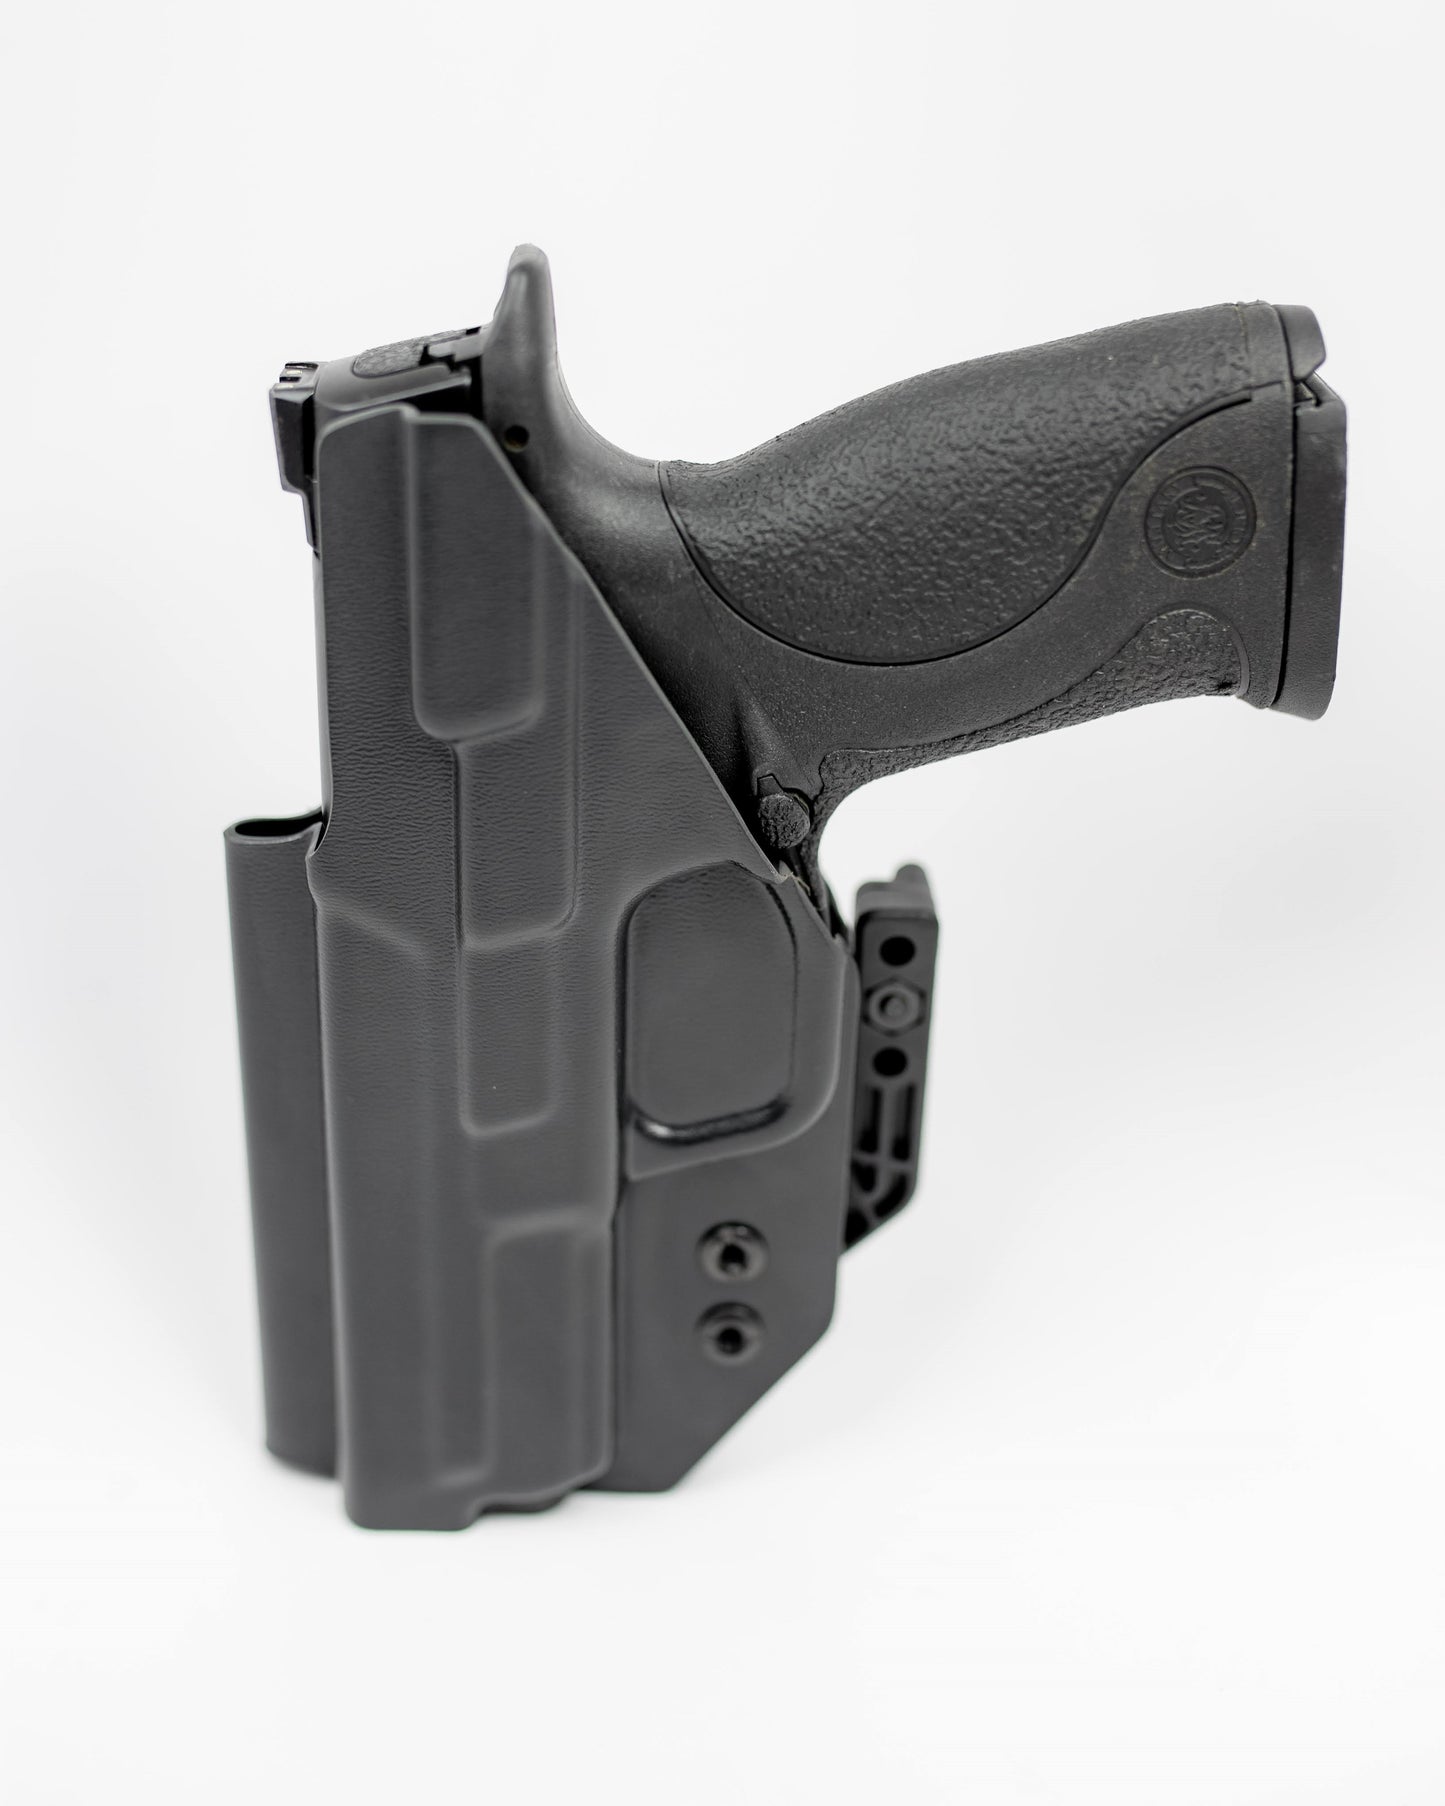 Blem Smith and Wesson M&P IWB Holster